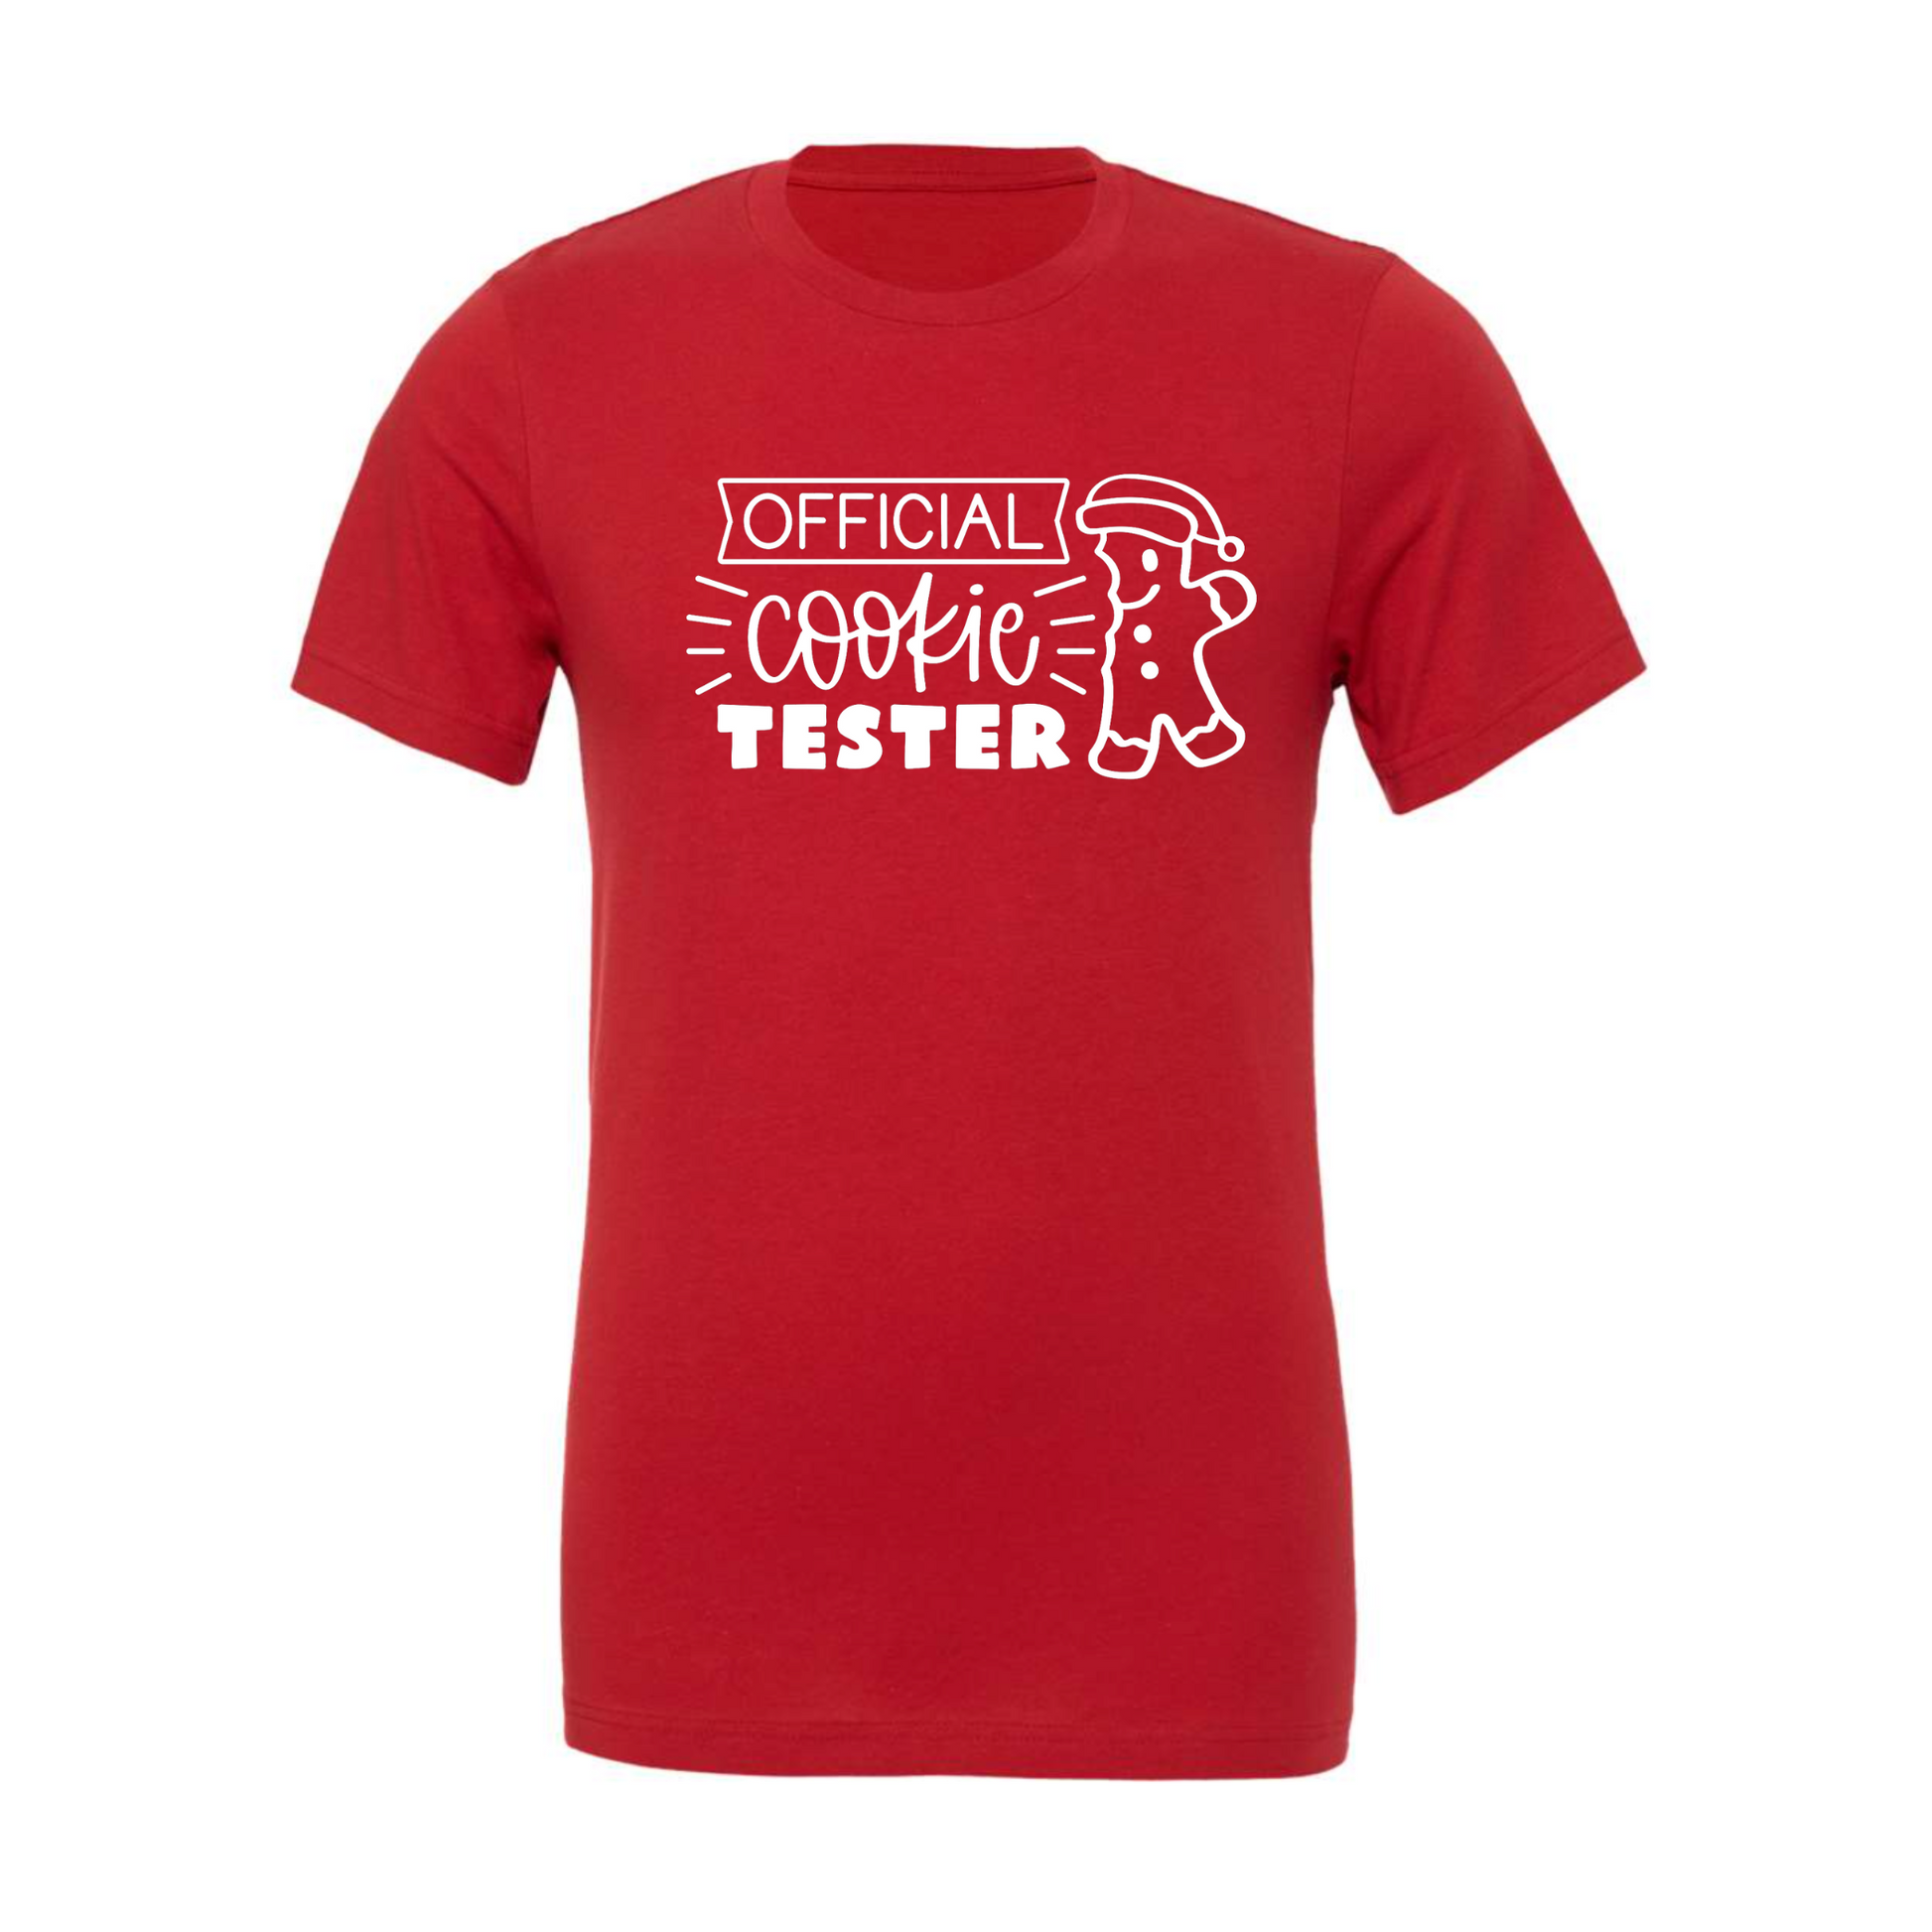 Official Cookie Tester - Red T-Shirt with white writing - Front View